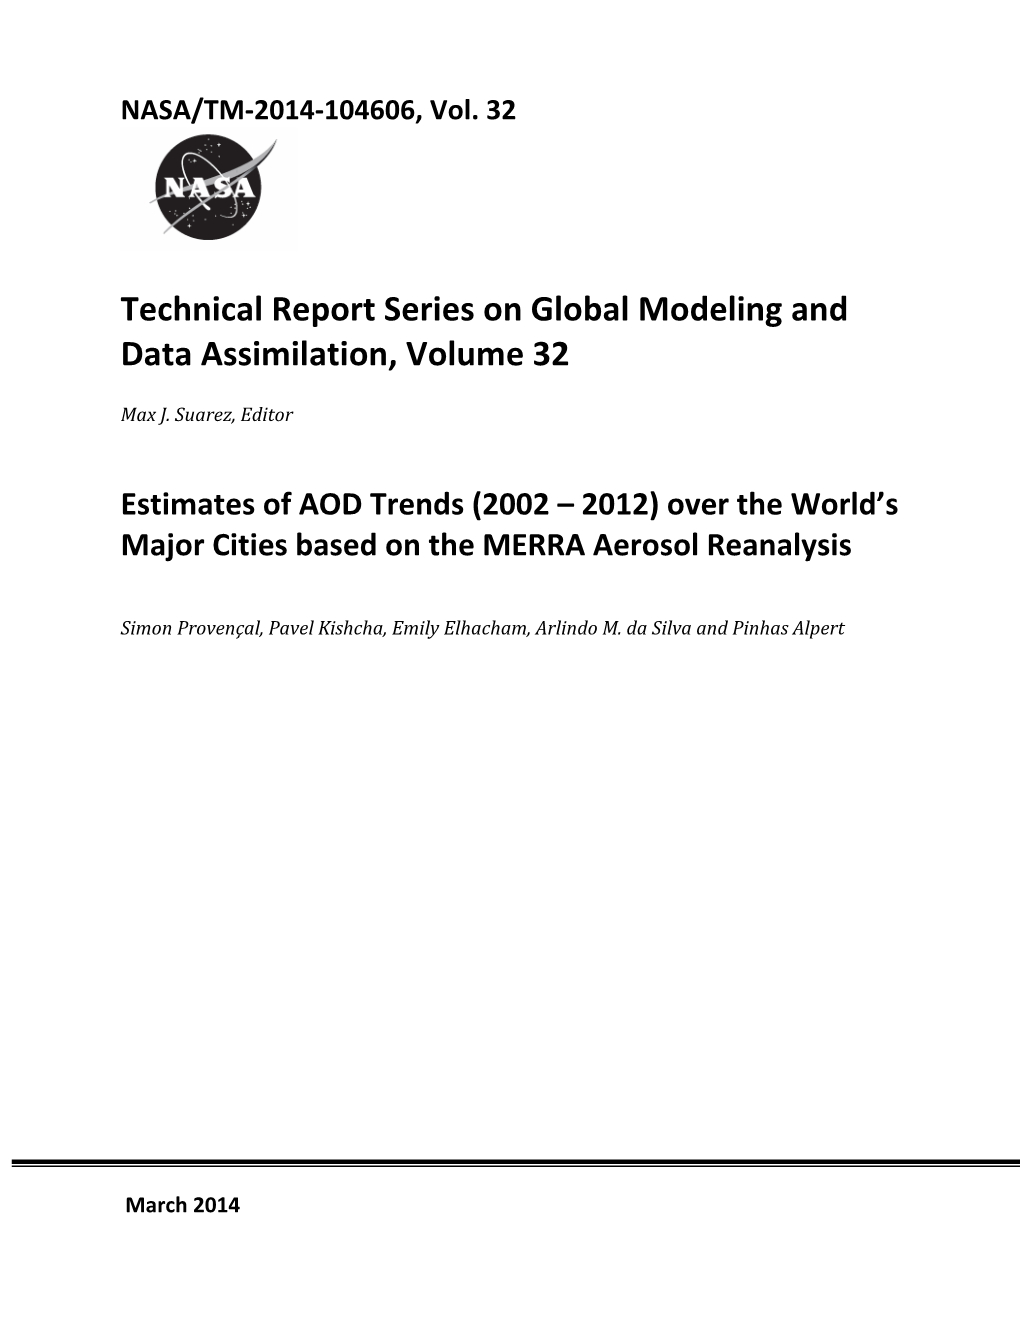 Technical Report Series on Global Modeling and Data Assimilation, Volume 32